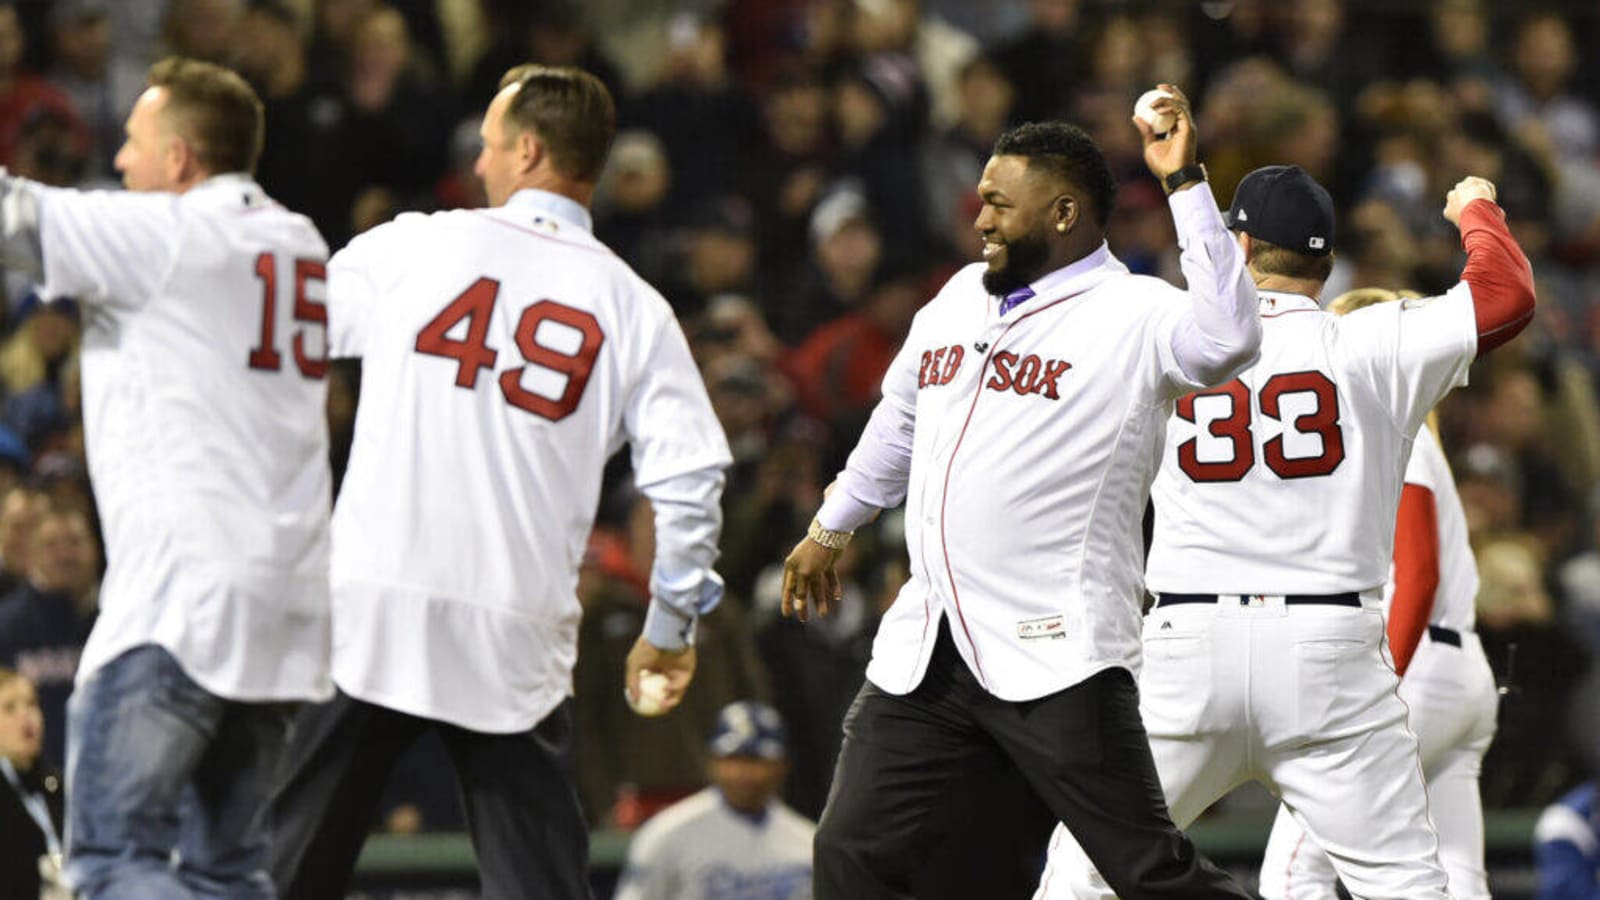 Red Sox To Honor 2004 Championship Team & Wakefield Family